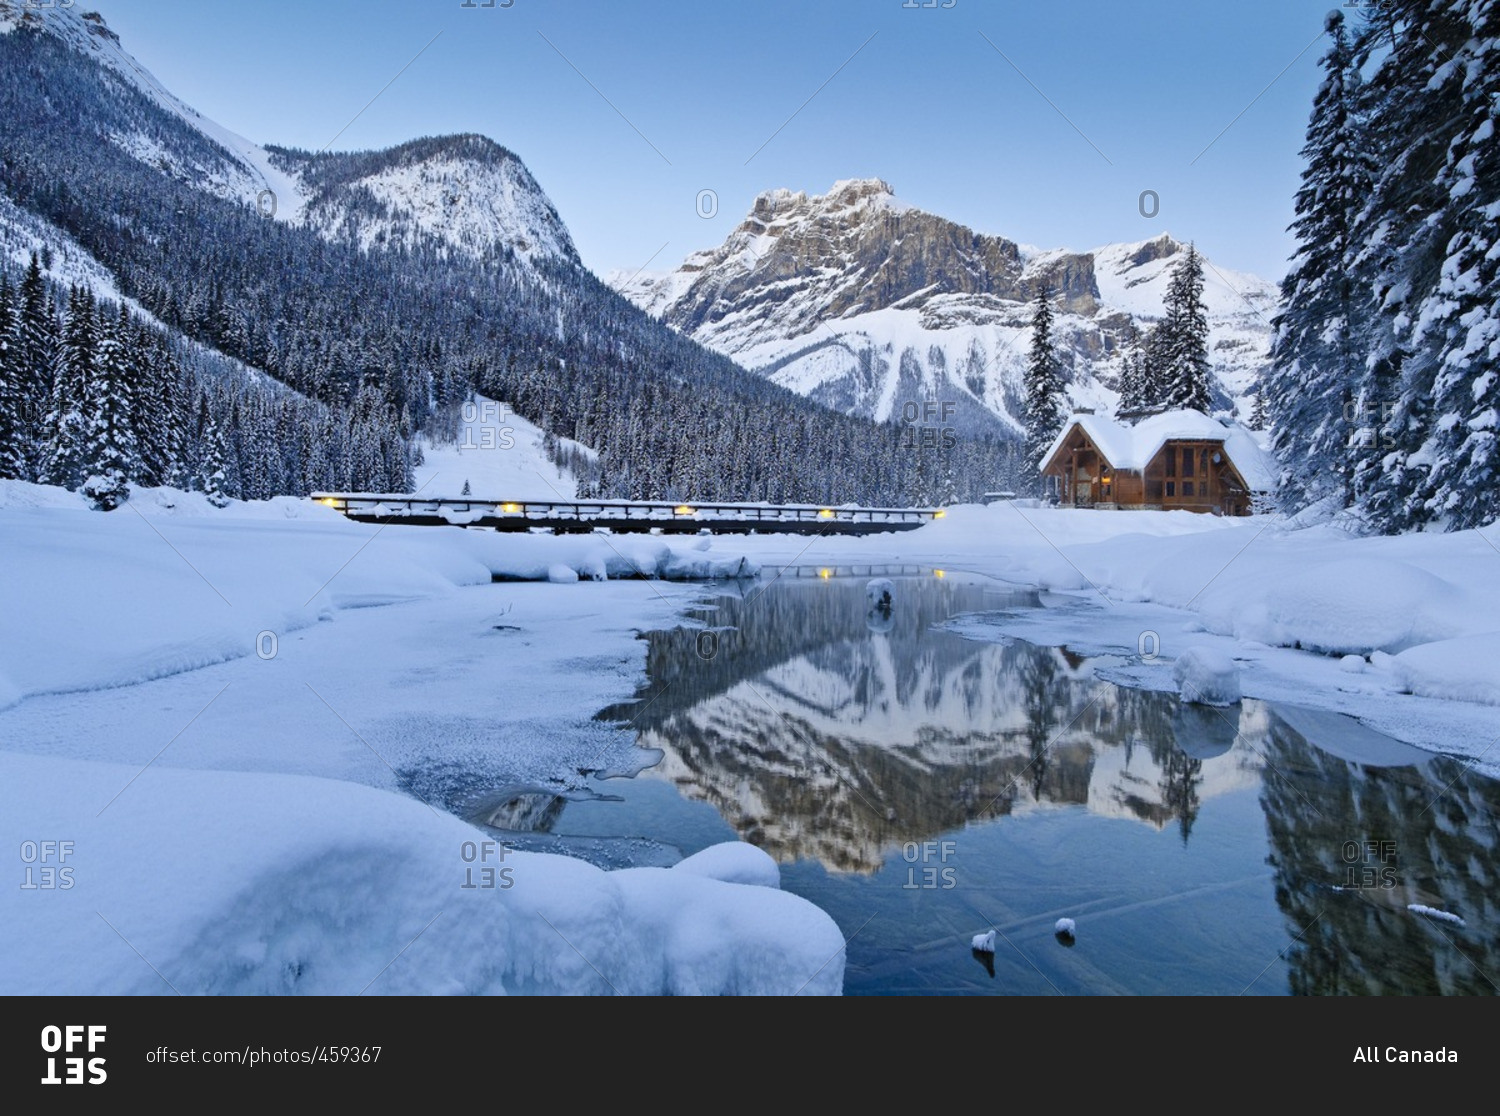 Restaurant of Emerald Lake Lodge complex, reflected in outlet stream at Emerald Lake, Winter, Yoho National Park, British Columbia, Canada